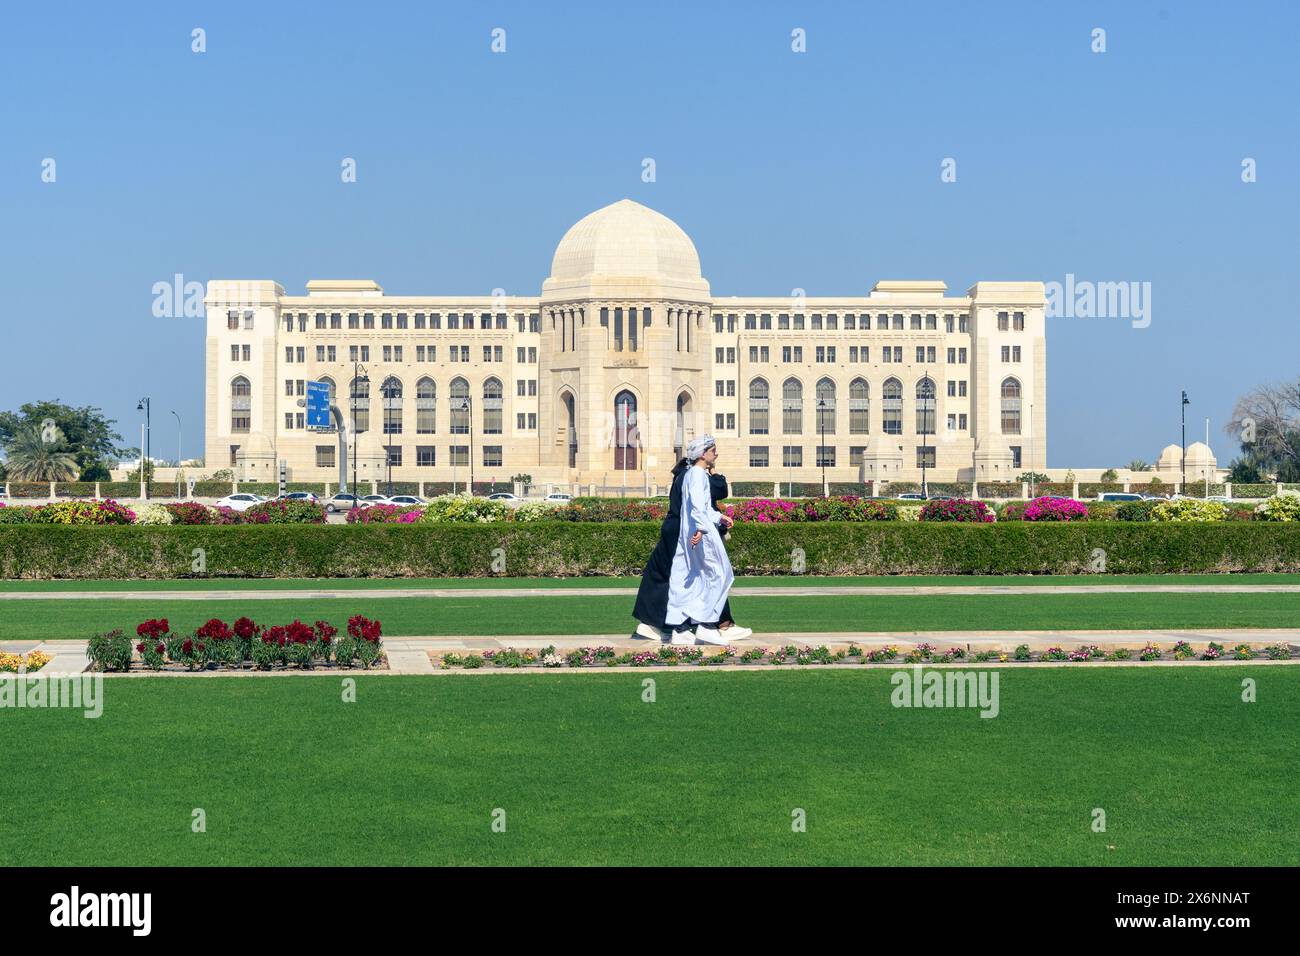 Muscat, Oman - January 2, 2024: A solitary figure takes a serene walk amidst the lush greenery, with the majestic architecture of a grand building und Stock Photo